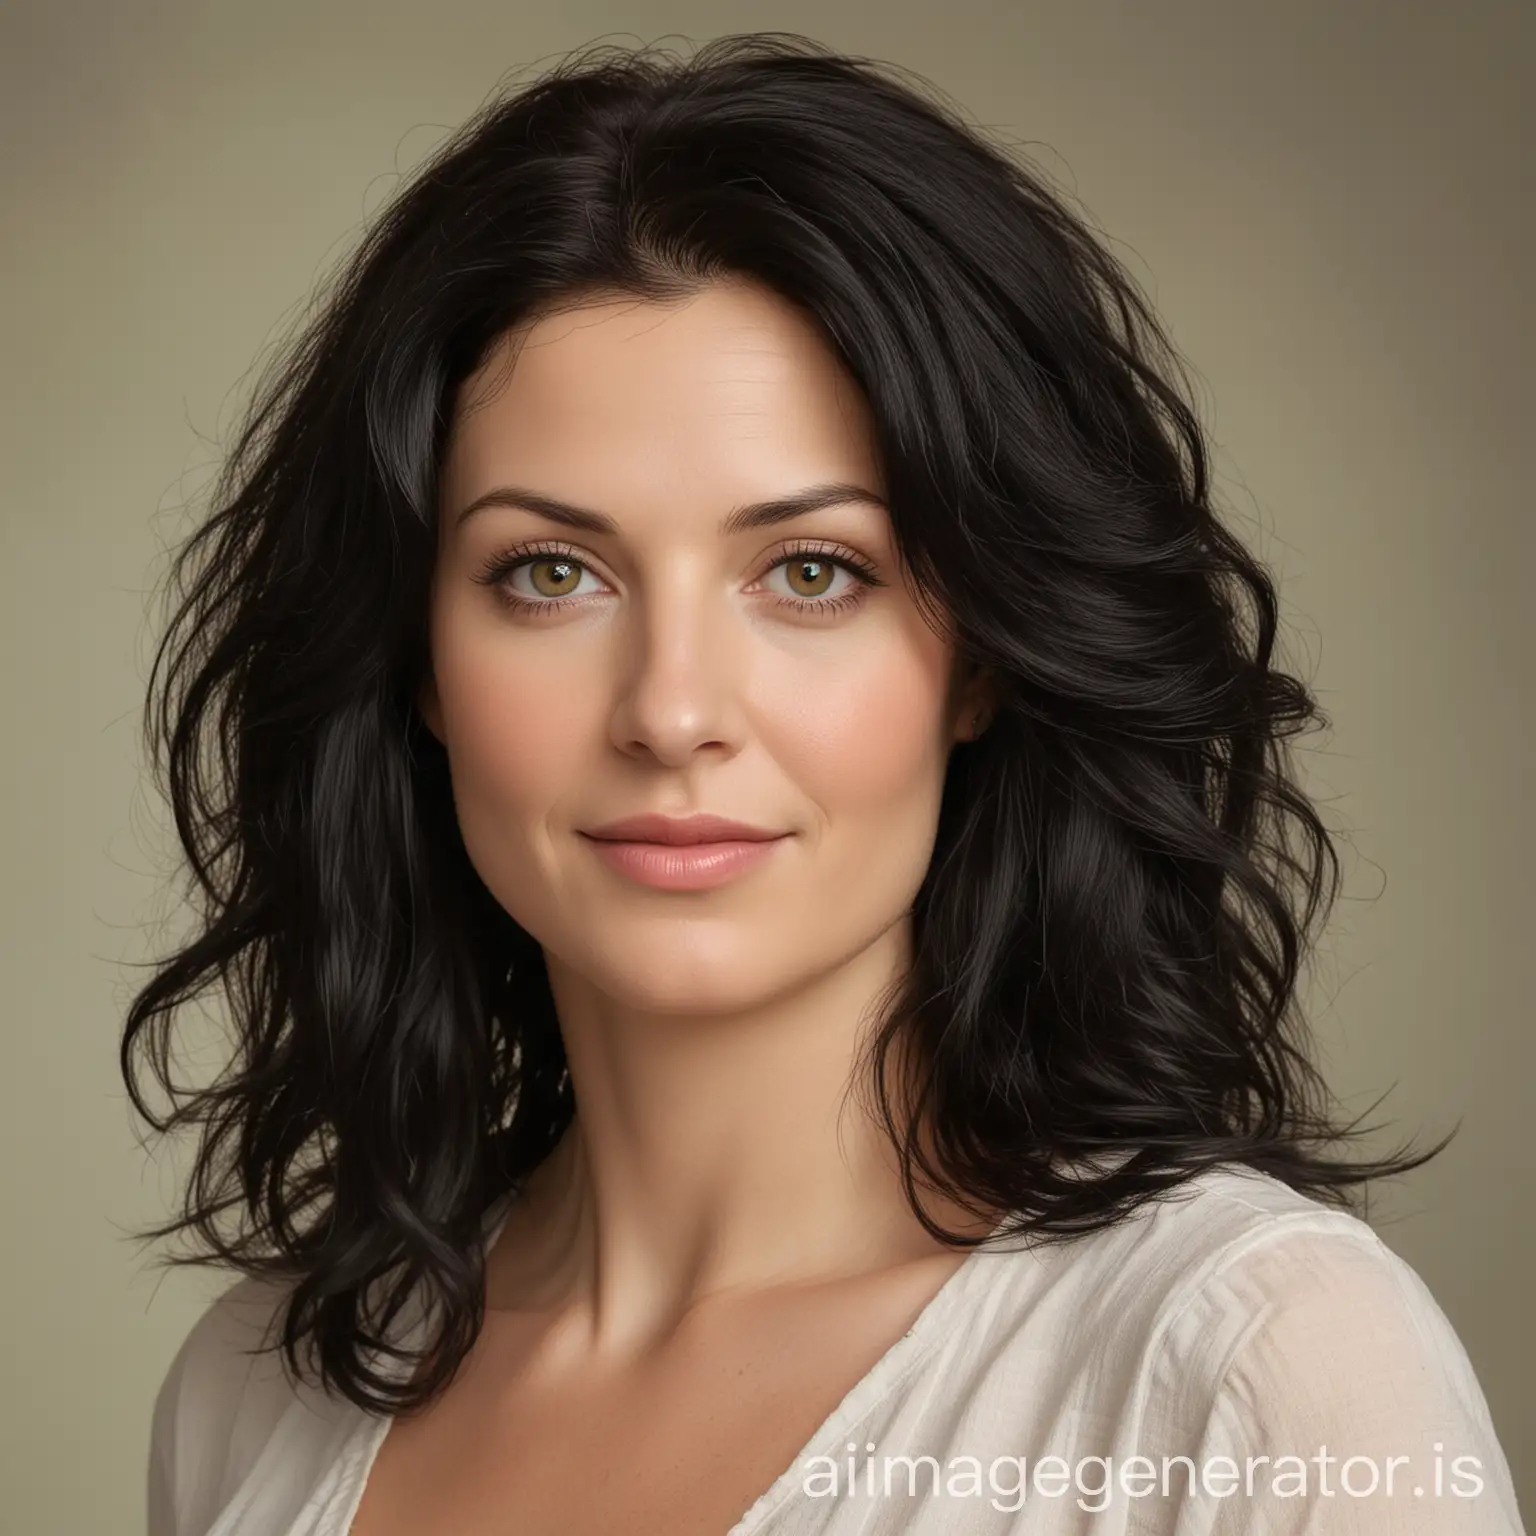 In color, make a fully clothed beautiful 35 year old, 5' 6'' 128 pound White woman with soft wavy shoulder length black hair, kind eyes, neutral background